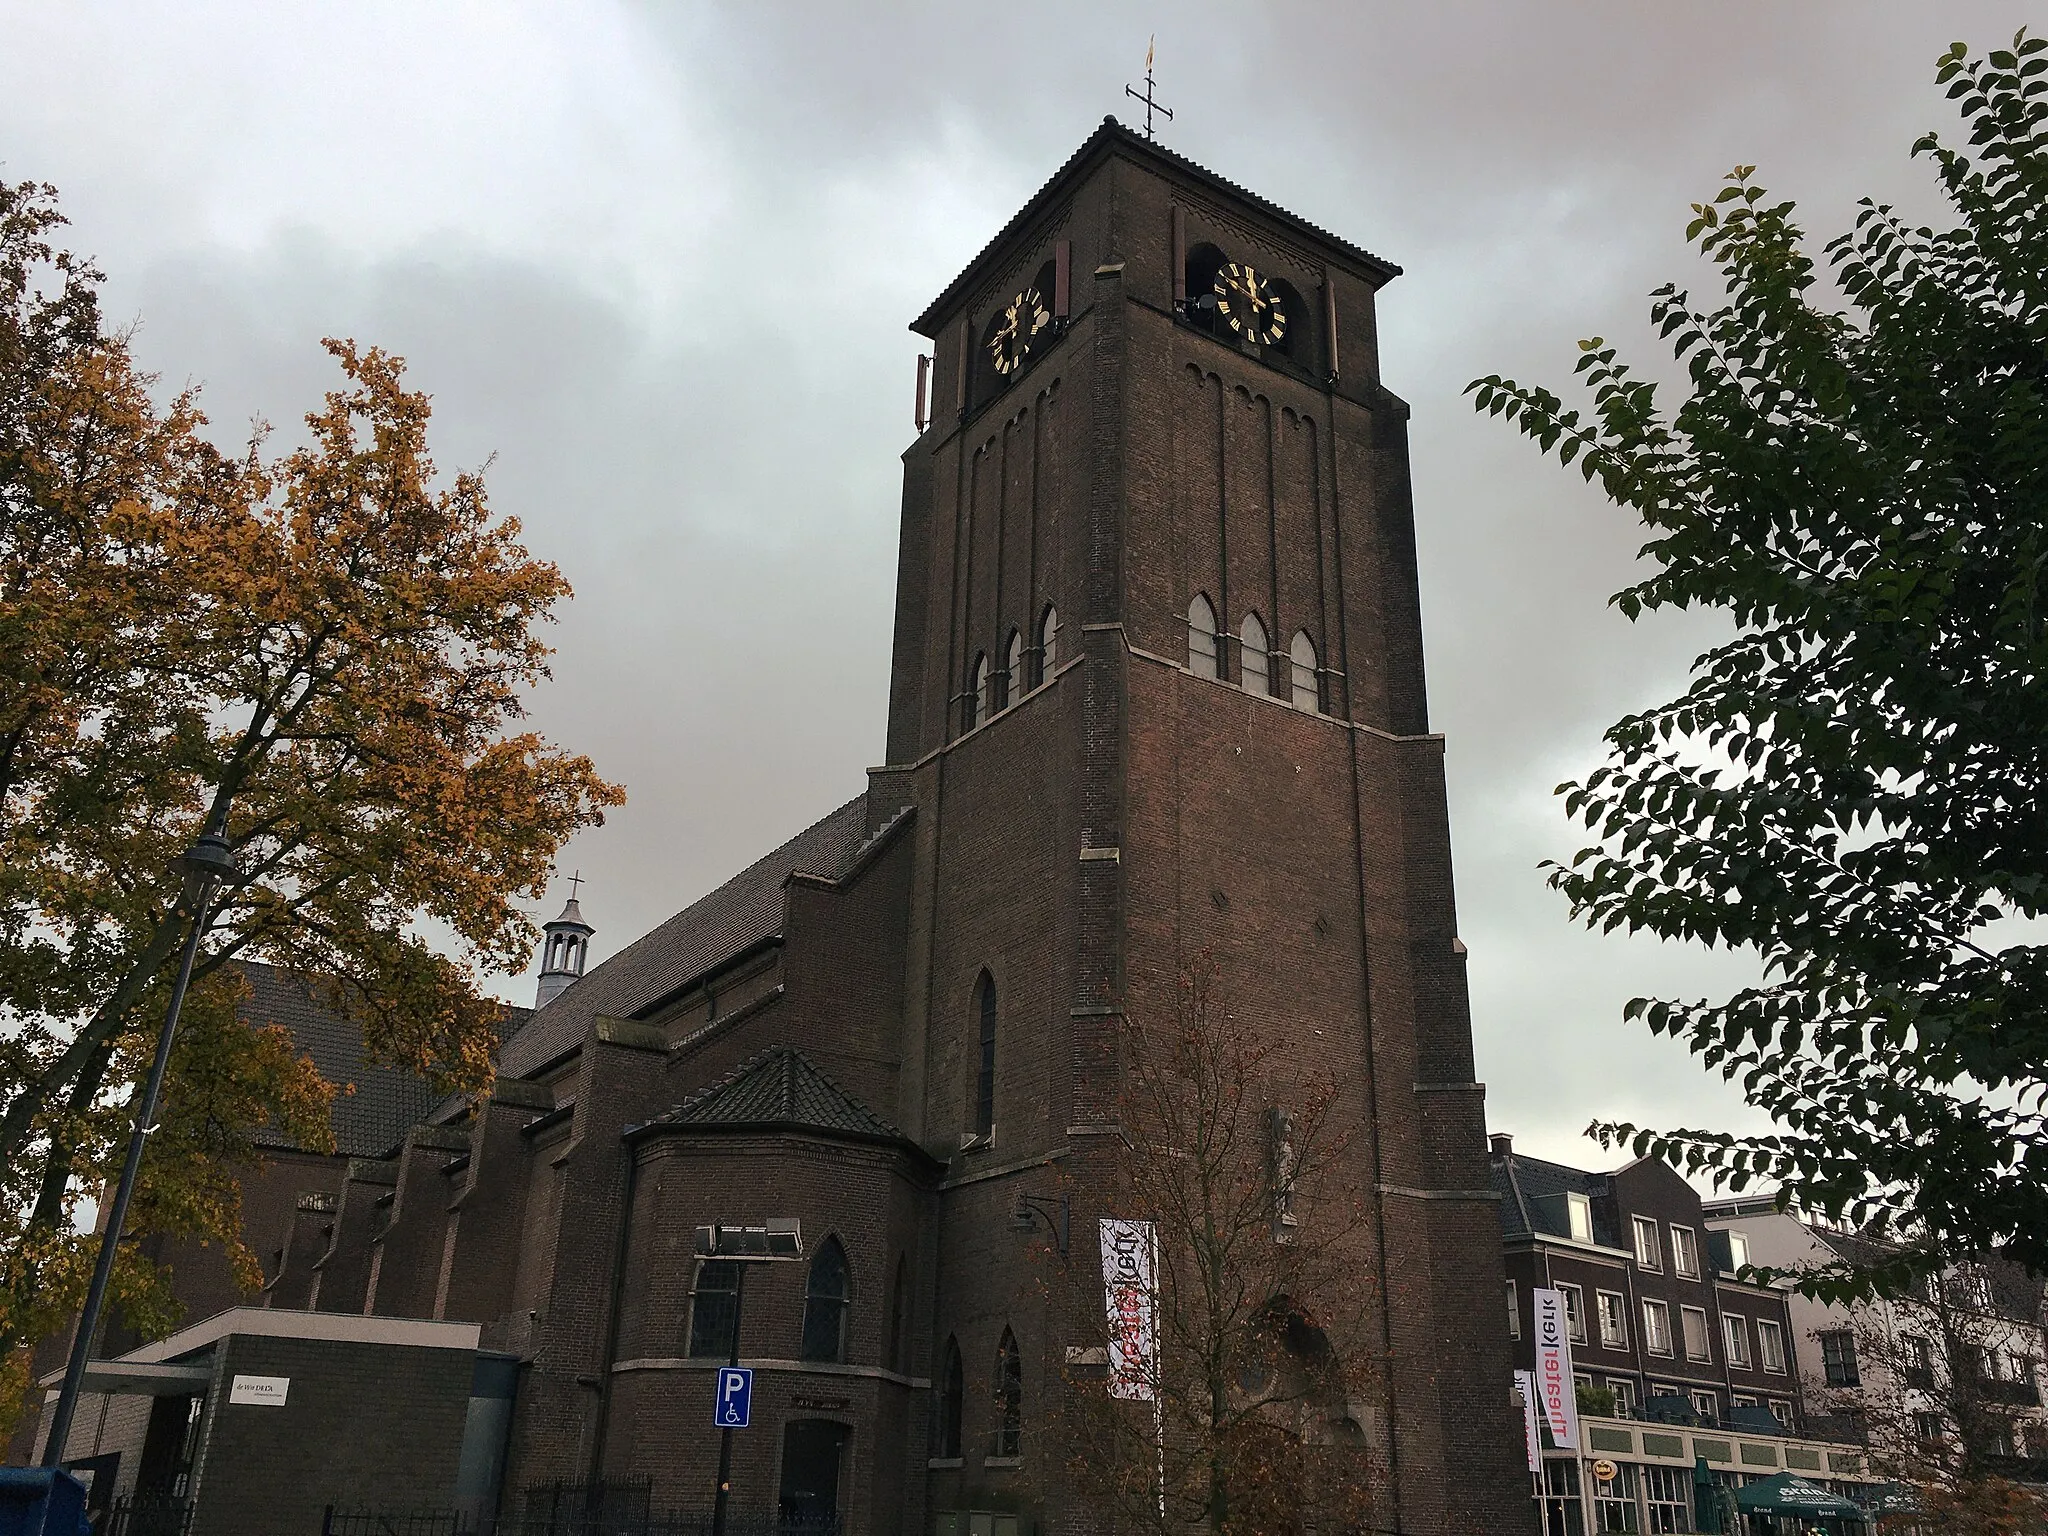 Photo showing: A side view of the Bemmel Theaterchurch on a dark and rainy day in November.